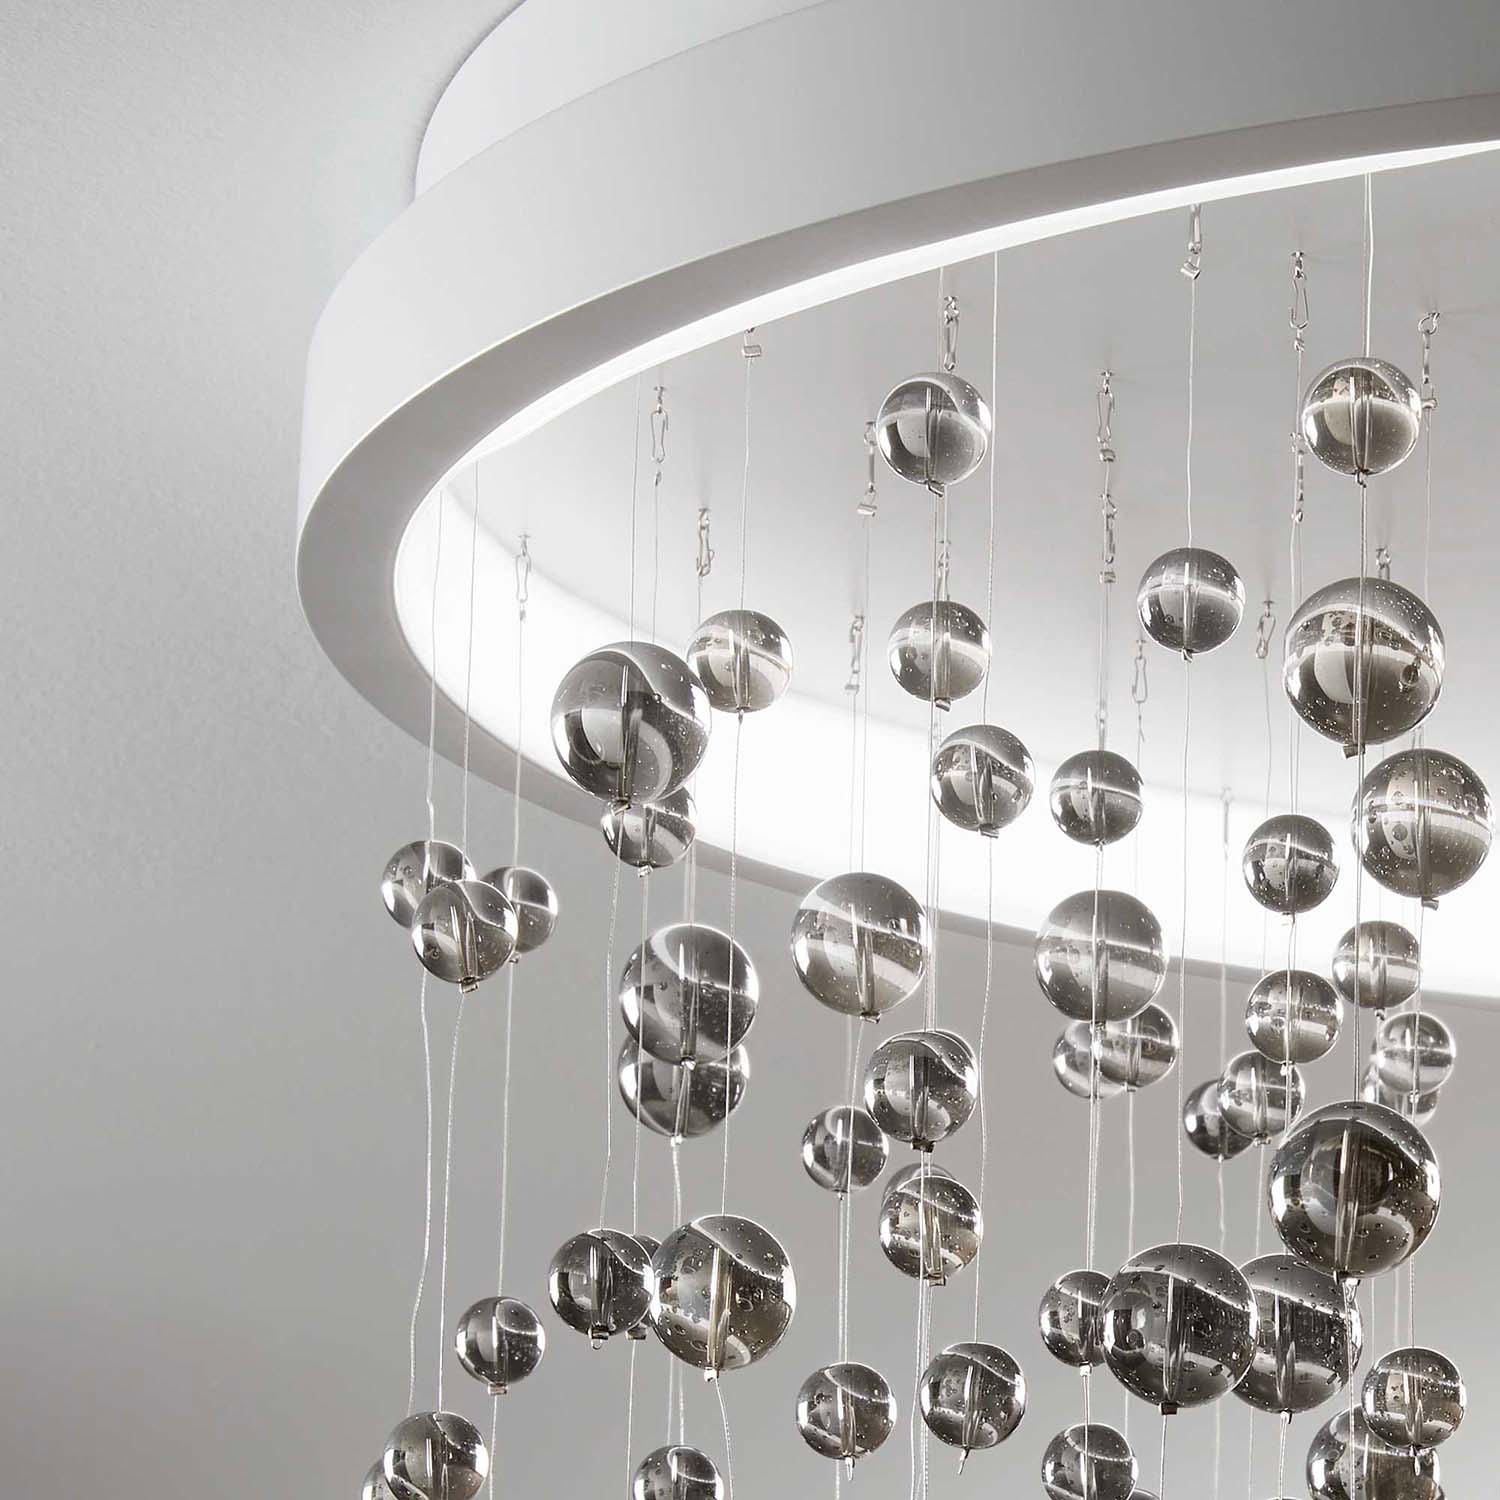 ARMONY - LED ceiling light and smoked glass beads